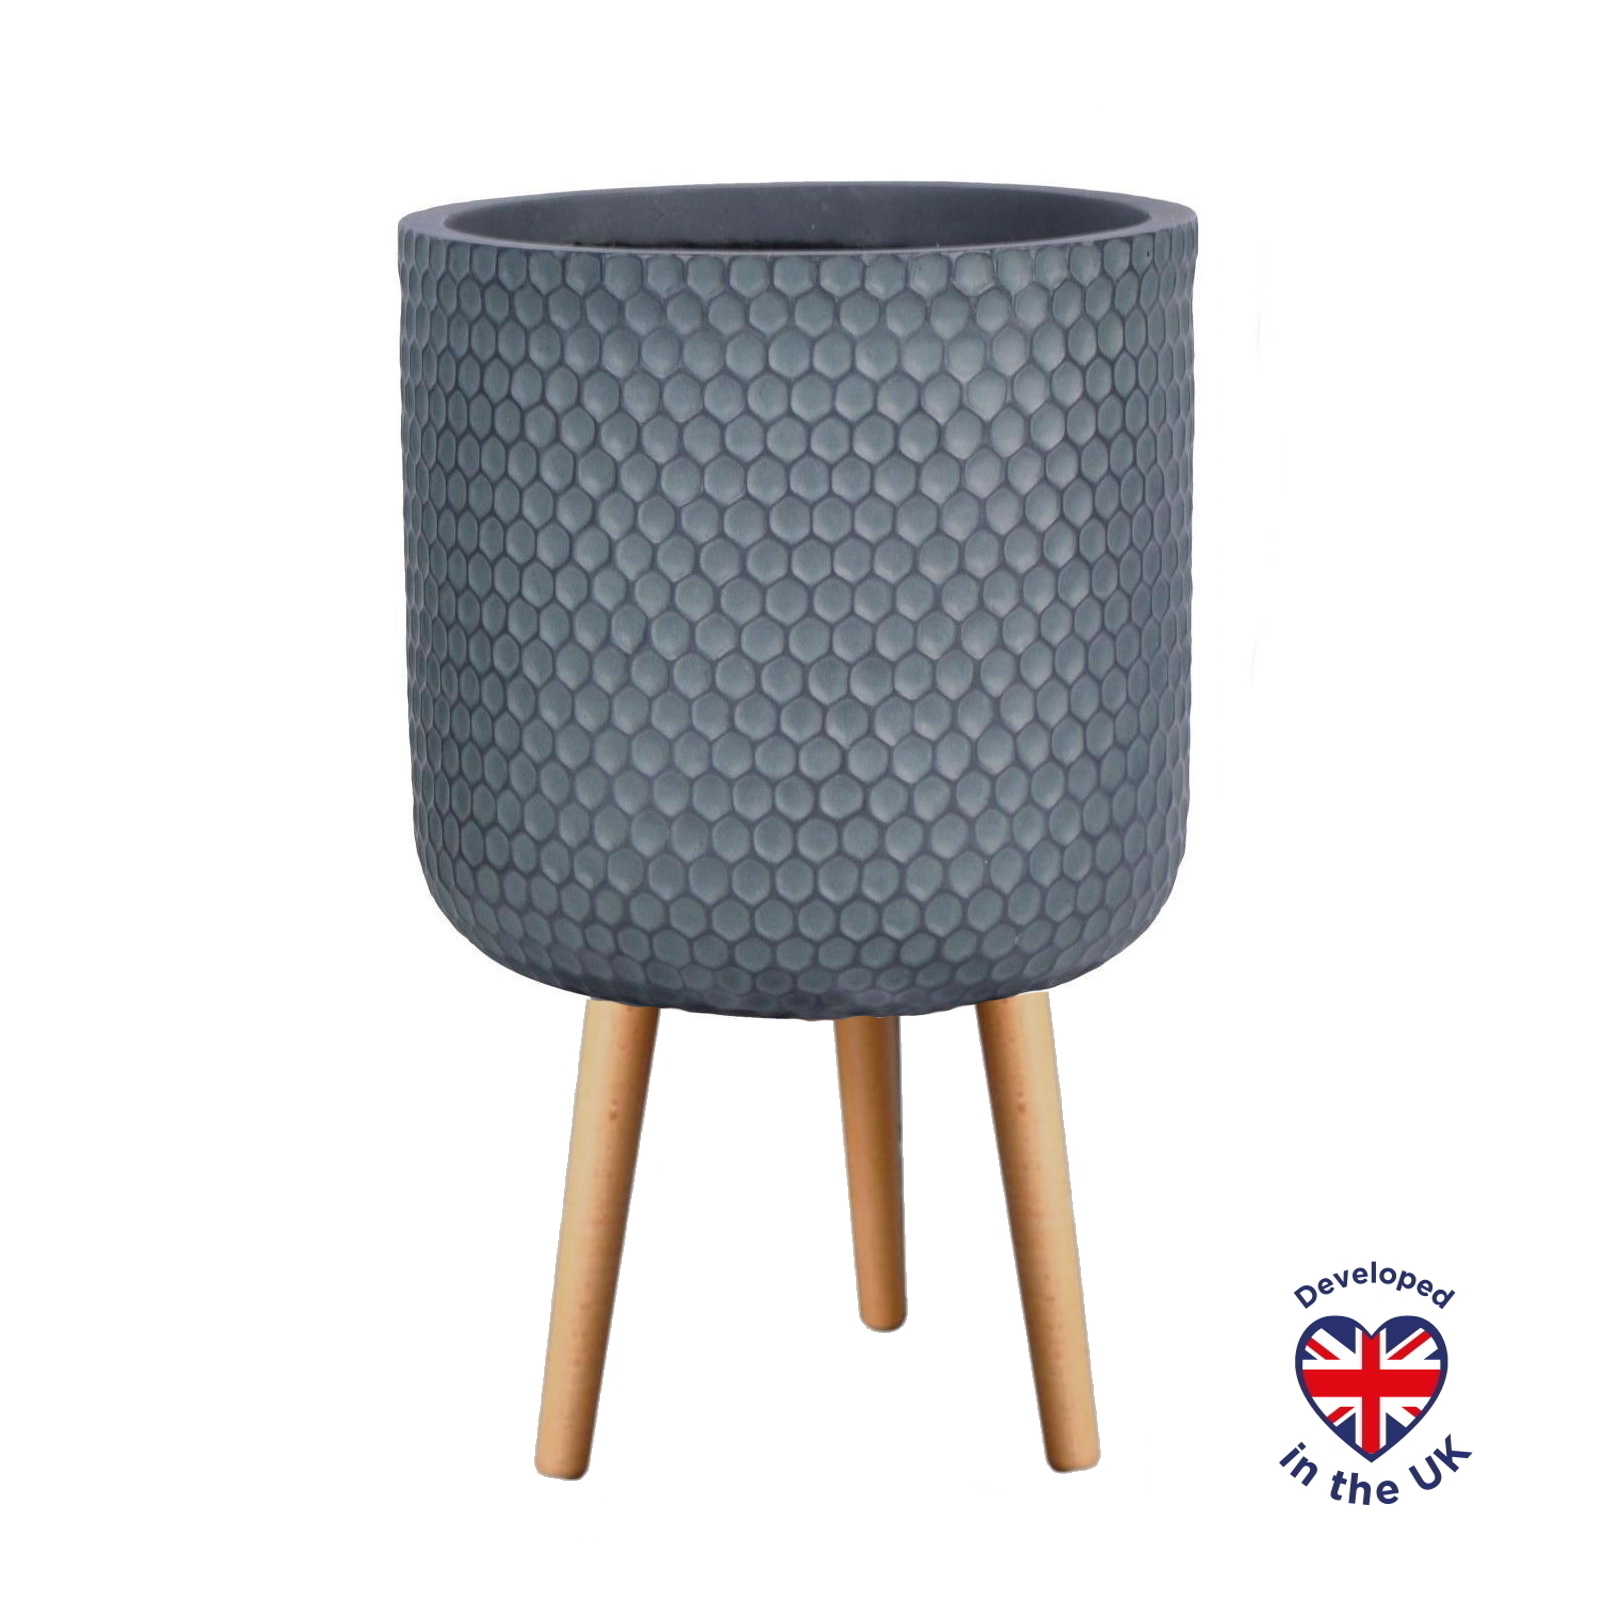 Honeycomb Style Slate Grey Cylinder Round Indoor Planter with Legs D37.5 H61 cm, 32.7 ltrs Cap.